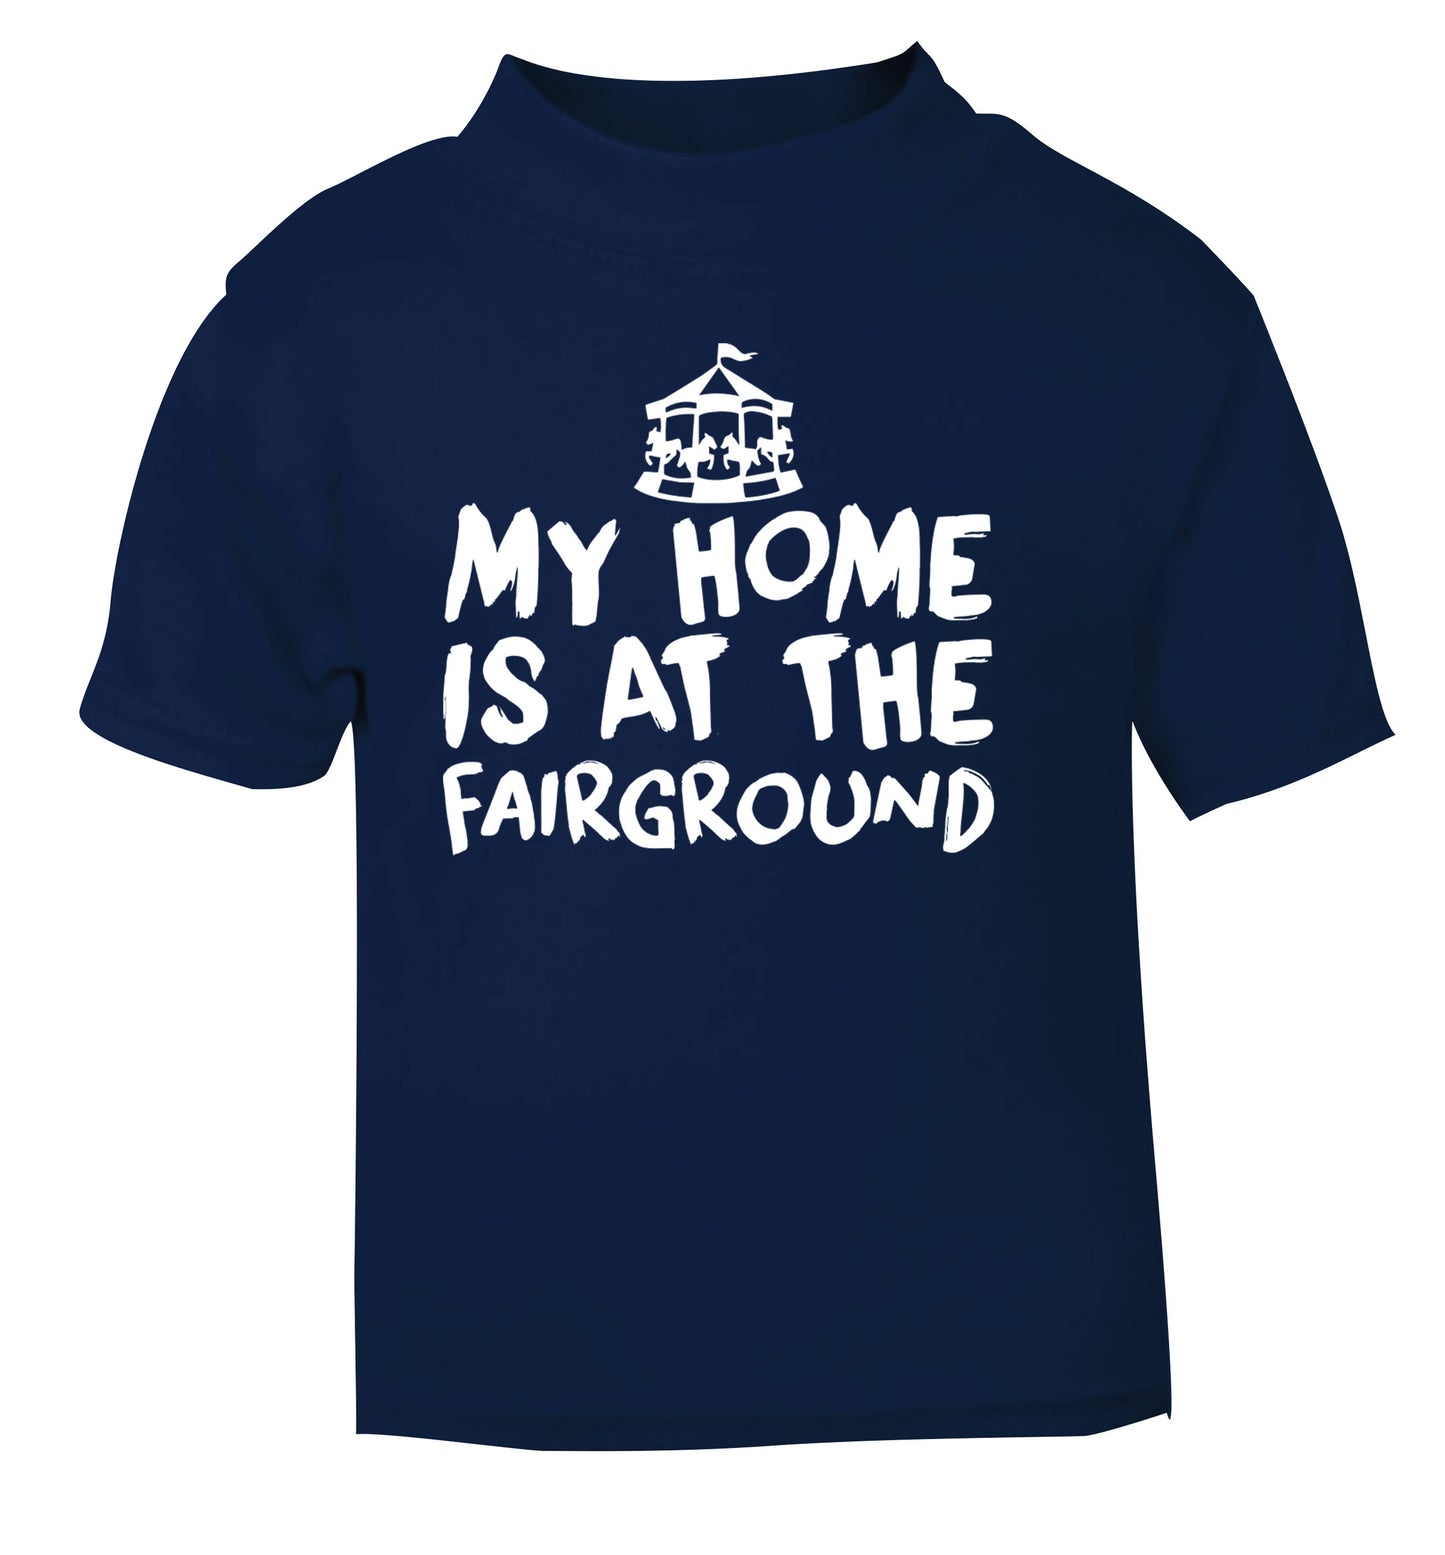 My home is at the fairground navy Baby Toddler Tshirt 2 Years